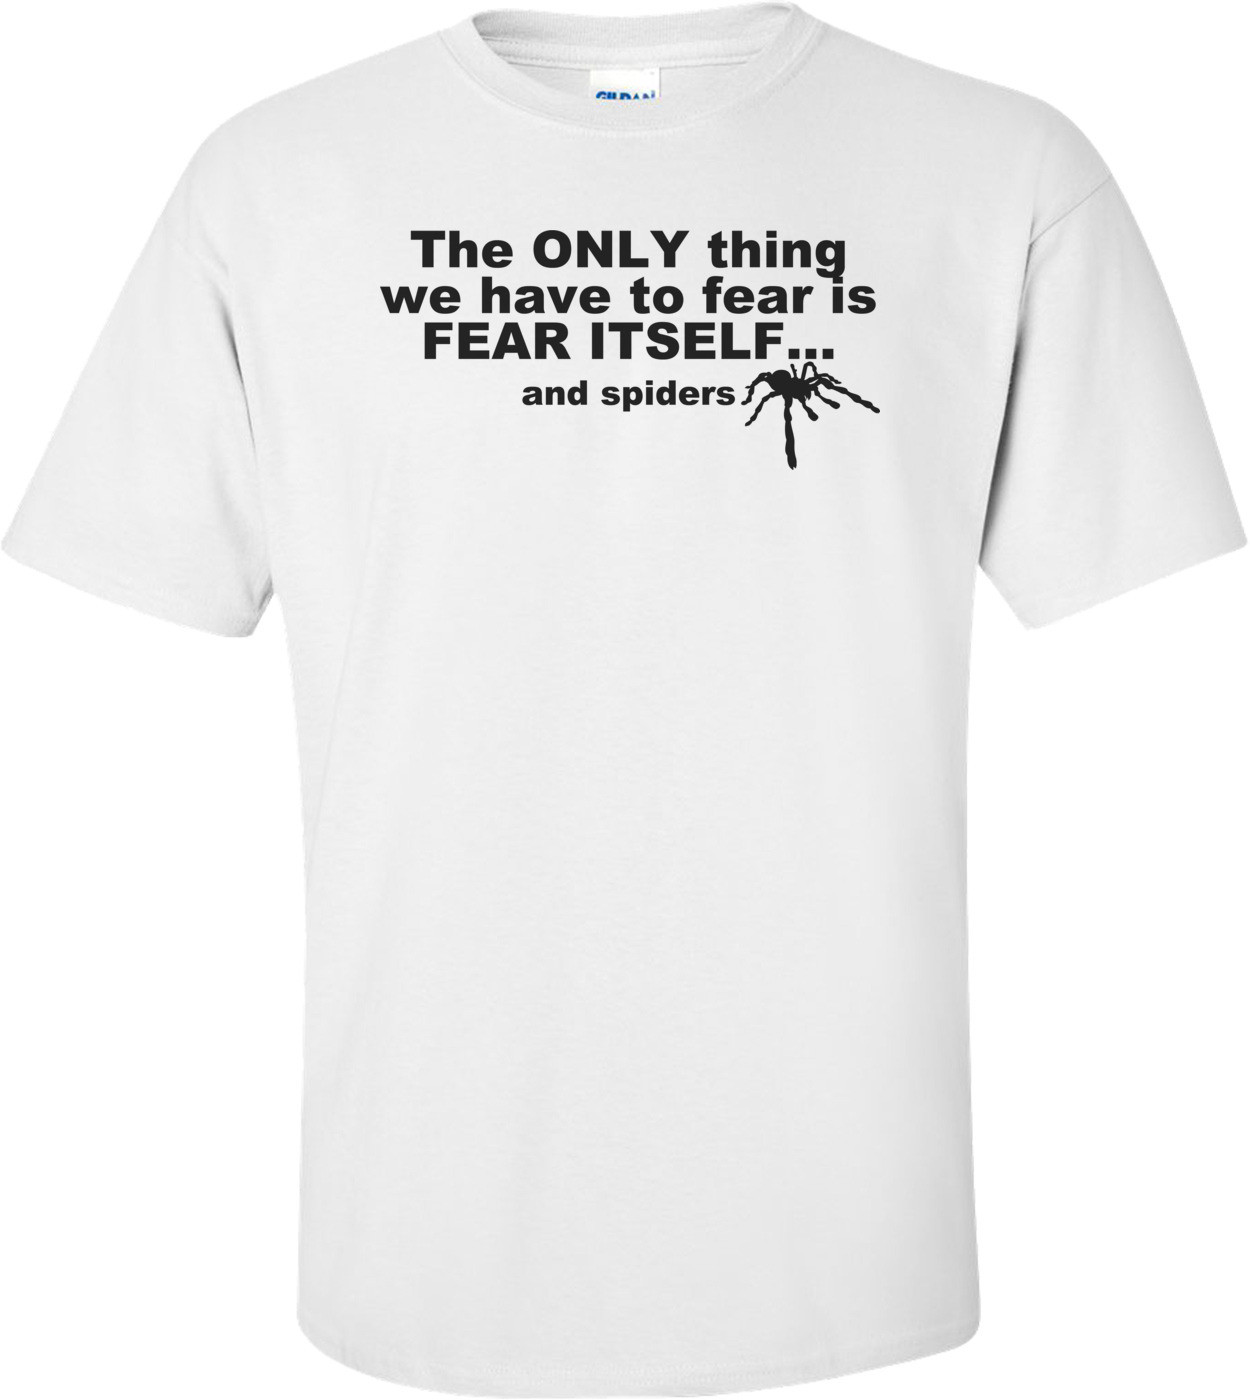 The Only Thing We Have To Fear Is Fear Itself And Spiders Shirt